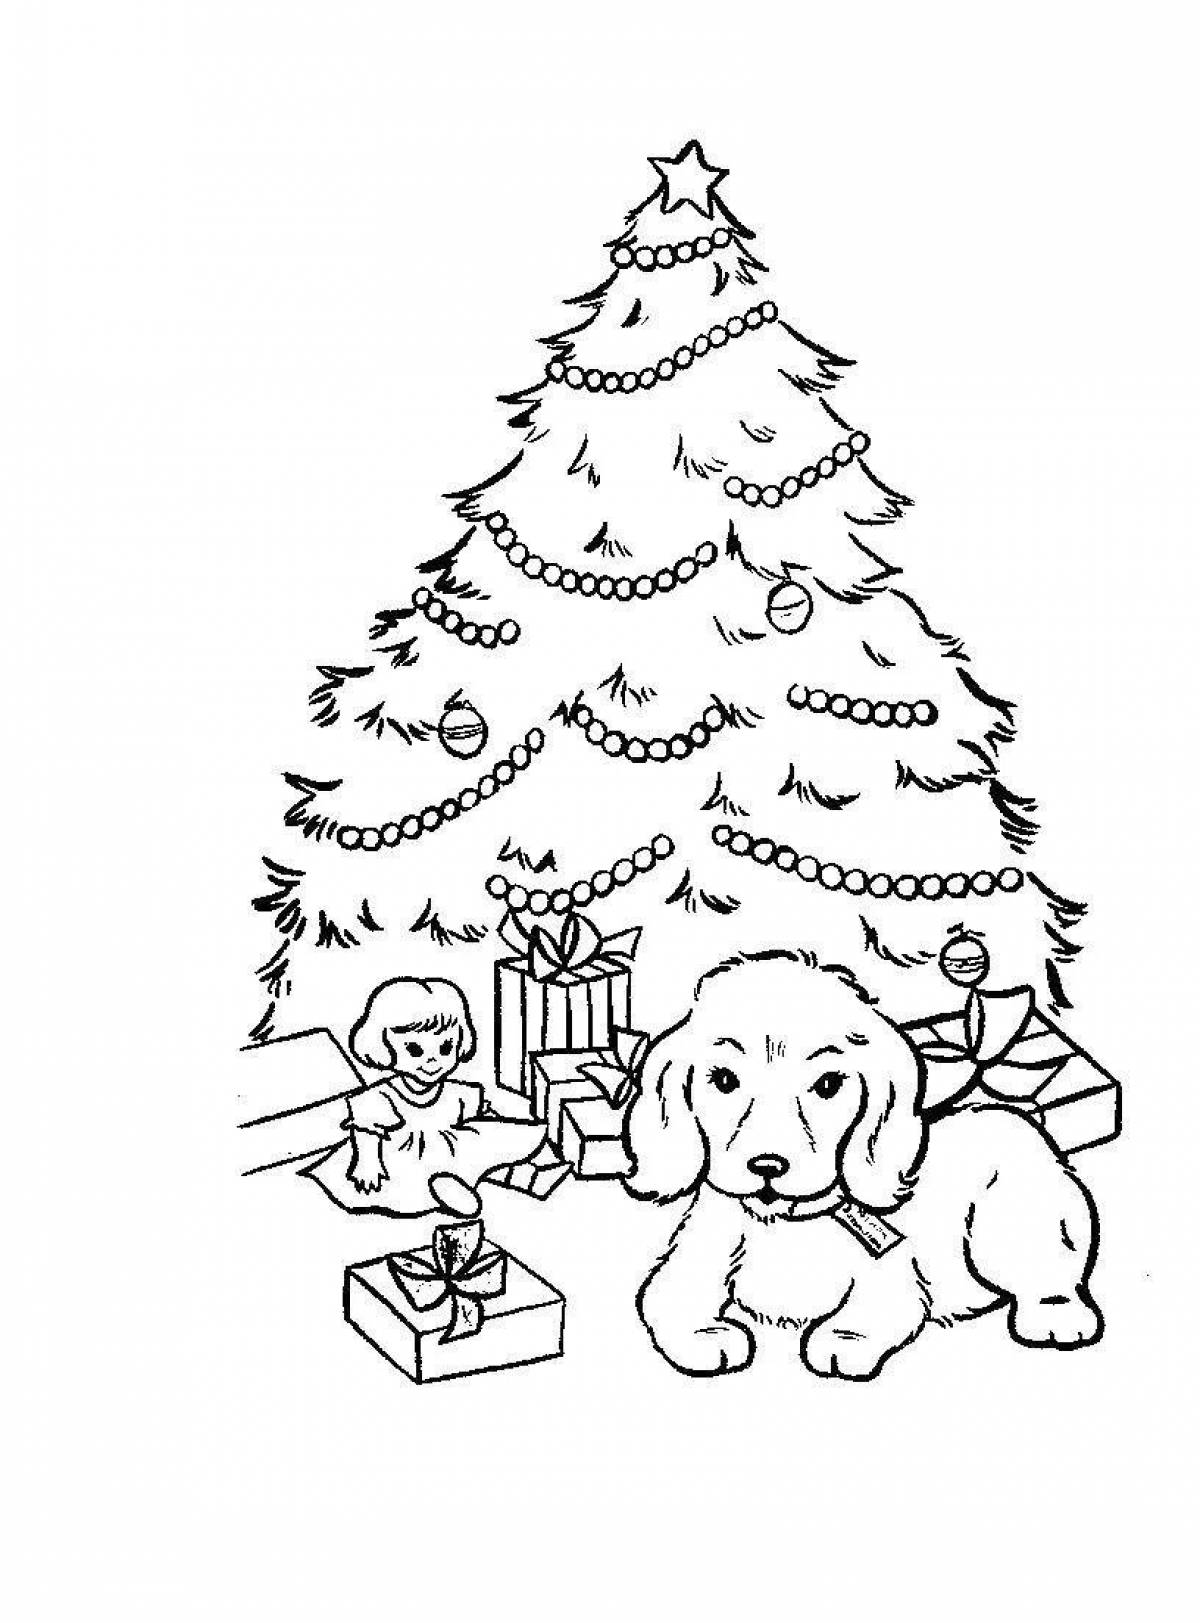 Coloring book forest shining raised a Christmas tree